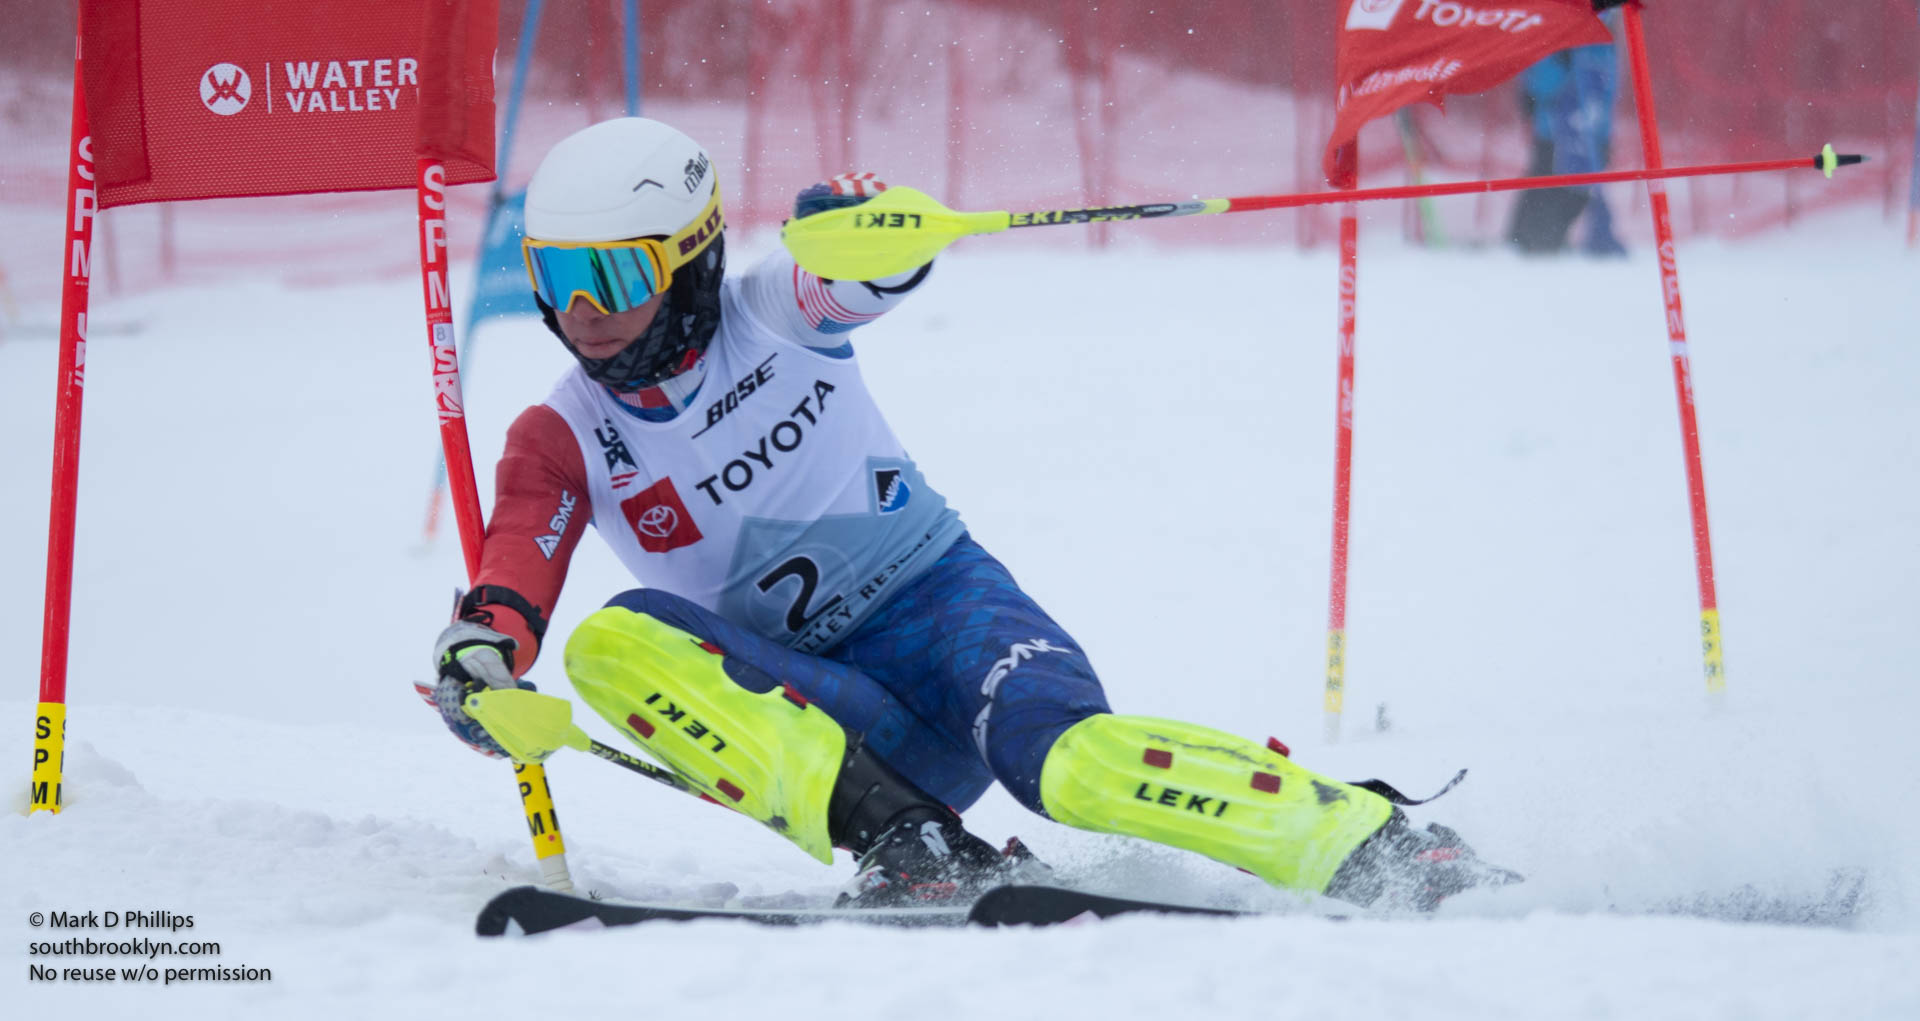 Garret Driller skis to a First Place finish in parallel slalom at the US Nationals in Alpine Skiing at Waterville Valley, New Hampshire, on March 23, 2019.